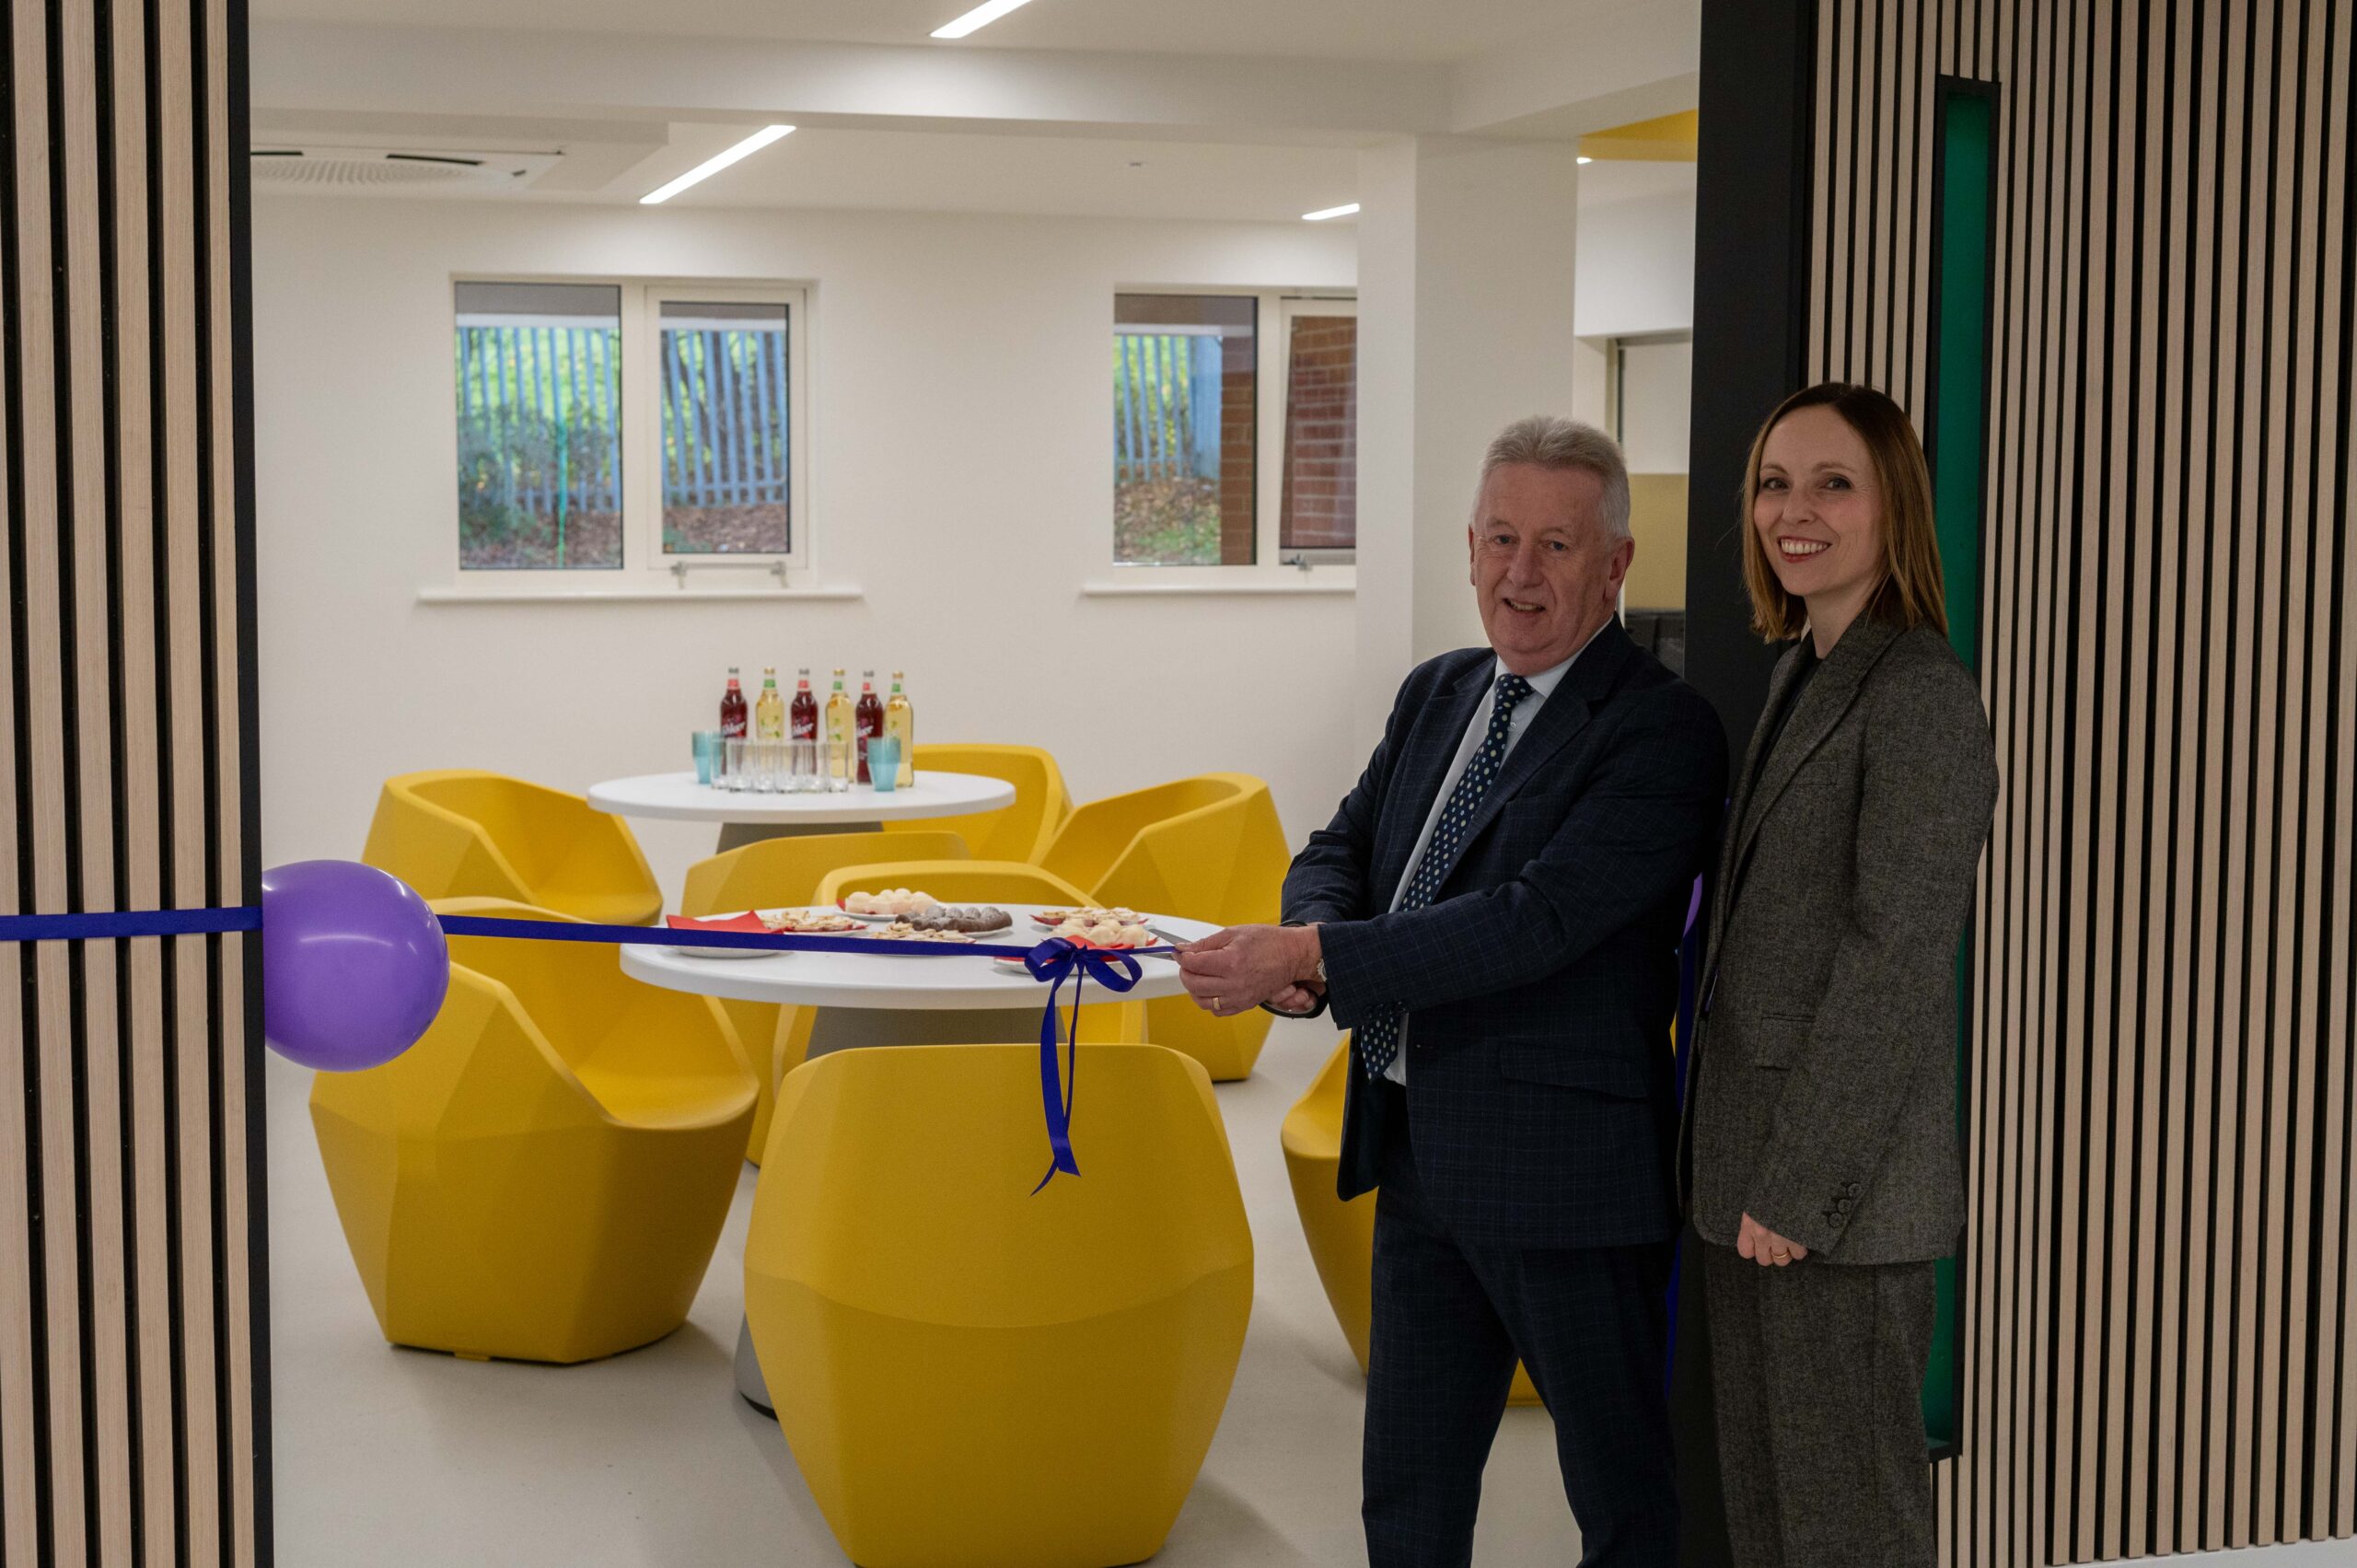 £1.3m Investment Boosts School Experience For Barnsley Students